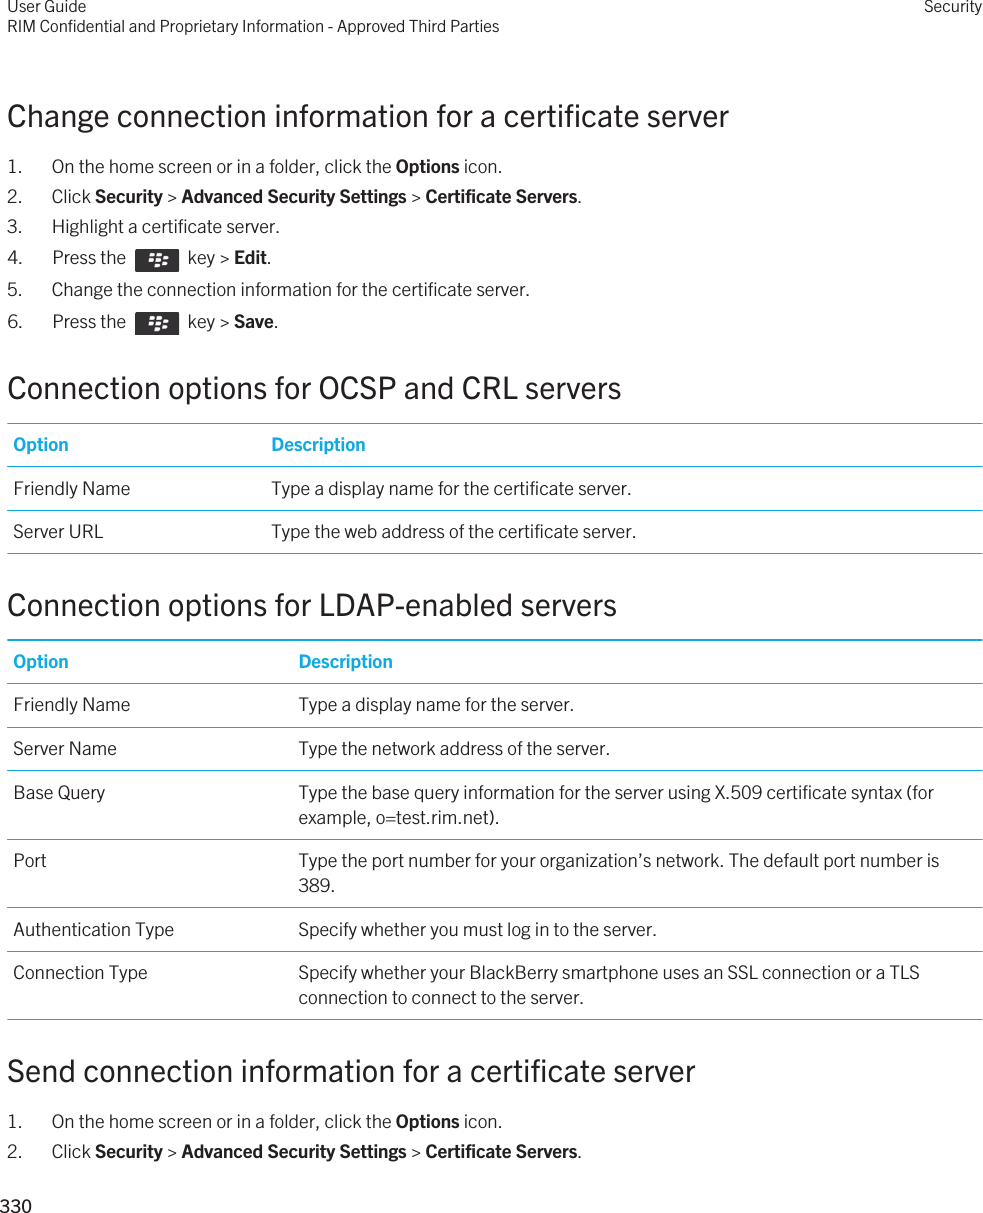 Change connection information for a certificate server1. On the home screen or in a folder, click the Options icon.2. Click Security &gt; Advanced Security Settings &gt; Certificate Servers.3. Highlight a certificate server.4.  Press the    key &gt; Edit. 5. Change the connection information for the certificate server.6.  Press the    key &gt; Save. Connection options for OCSP and CRL serversOption DescriptionFriendly Name Type a display name for the certificate server.Server URL Type the web address of the certificate server.Connection options for LDAP-enabled serversOption DescriptionFriendly Name Type a display name for the server.Server Name Type the network address of the server.Base Query Type the base query information for the server using X.509 certificate syntax (for example, o=test.rim.net).Port Type the port number for your organization’s network. The default port number is 389.Authentication Type Specify whether you must log in to the server.Connection Type Specify whether your BlackBerry smartphone uses an SSL connection or a TLS connection to connect to the server.Send connection information for a certificate server1. On the home screen or in a folder, click the Options icon.2. Click Security &gt; Advanced Security Settings &gt; Certificate Servers.User GuideRIM Confidential and Proprietary Information - Approved Third PartiesSecurity330 